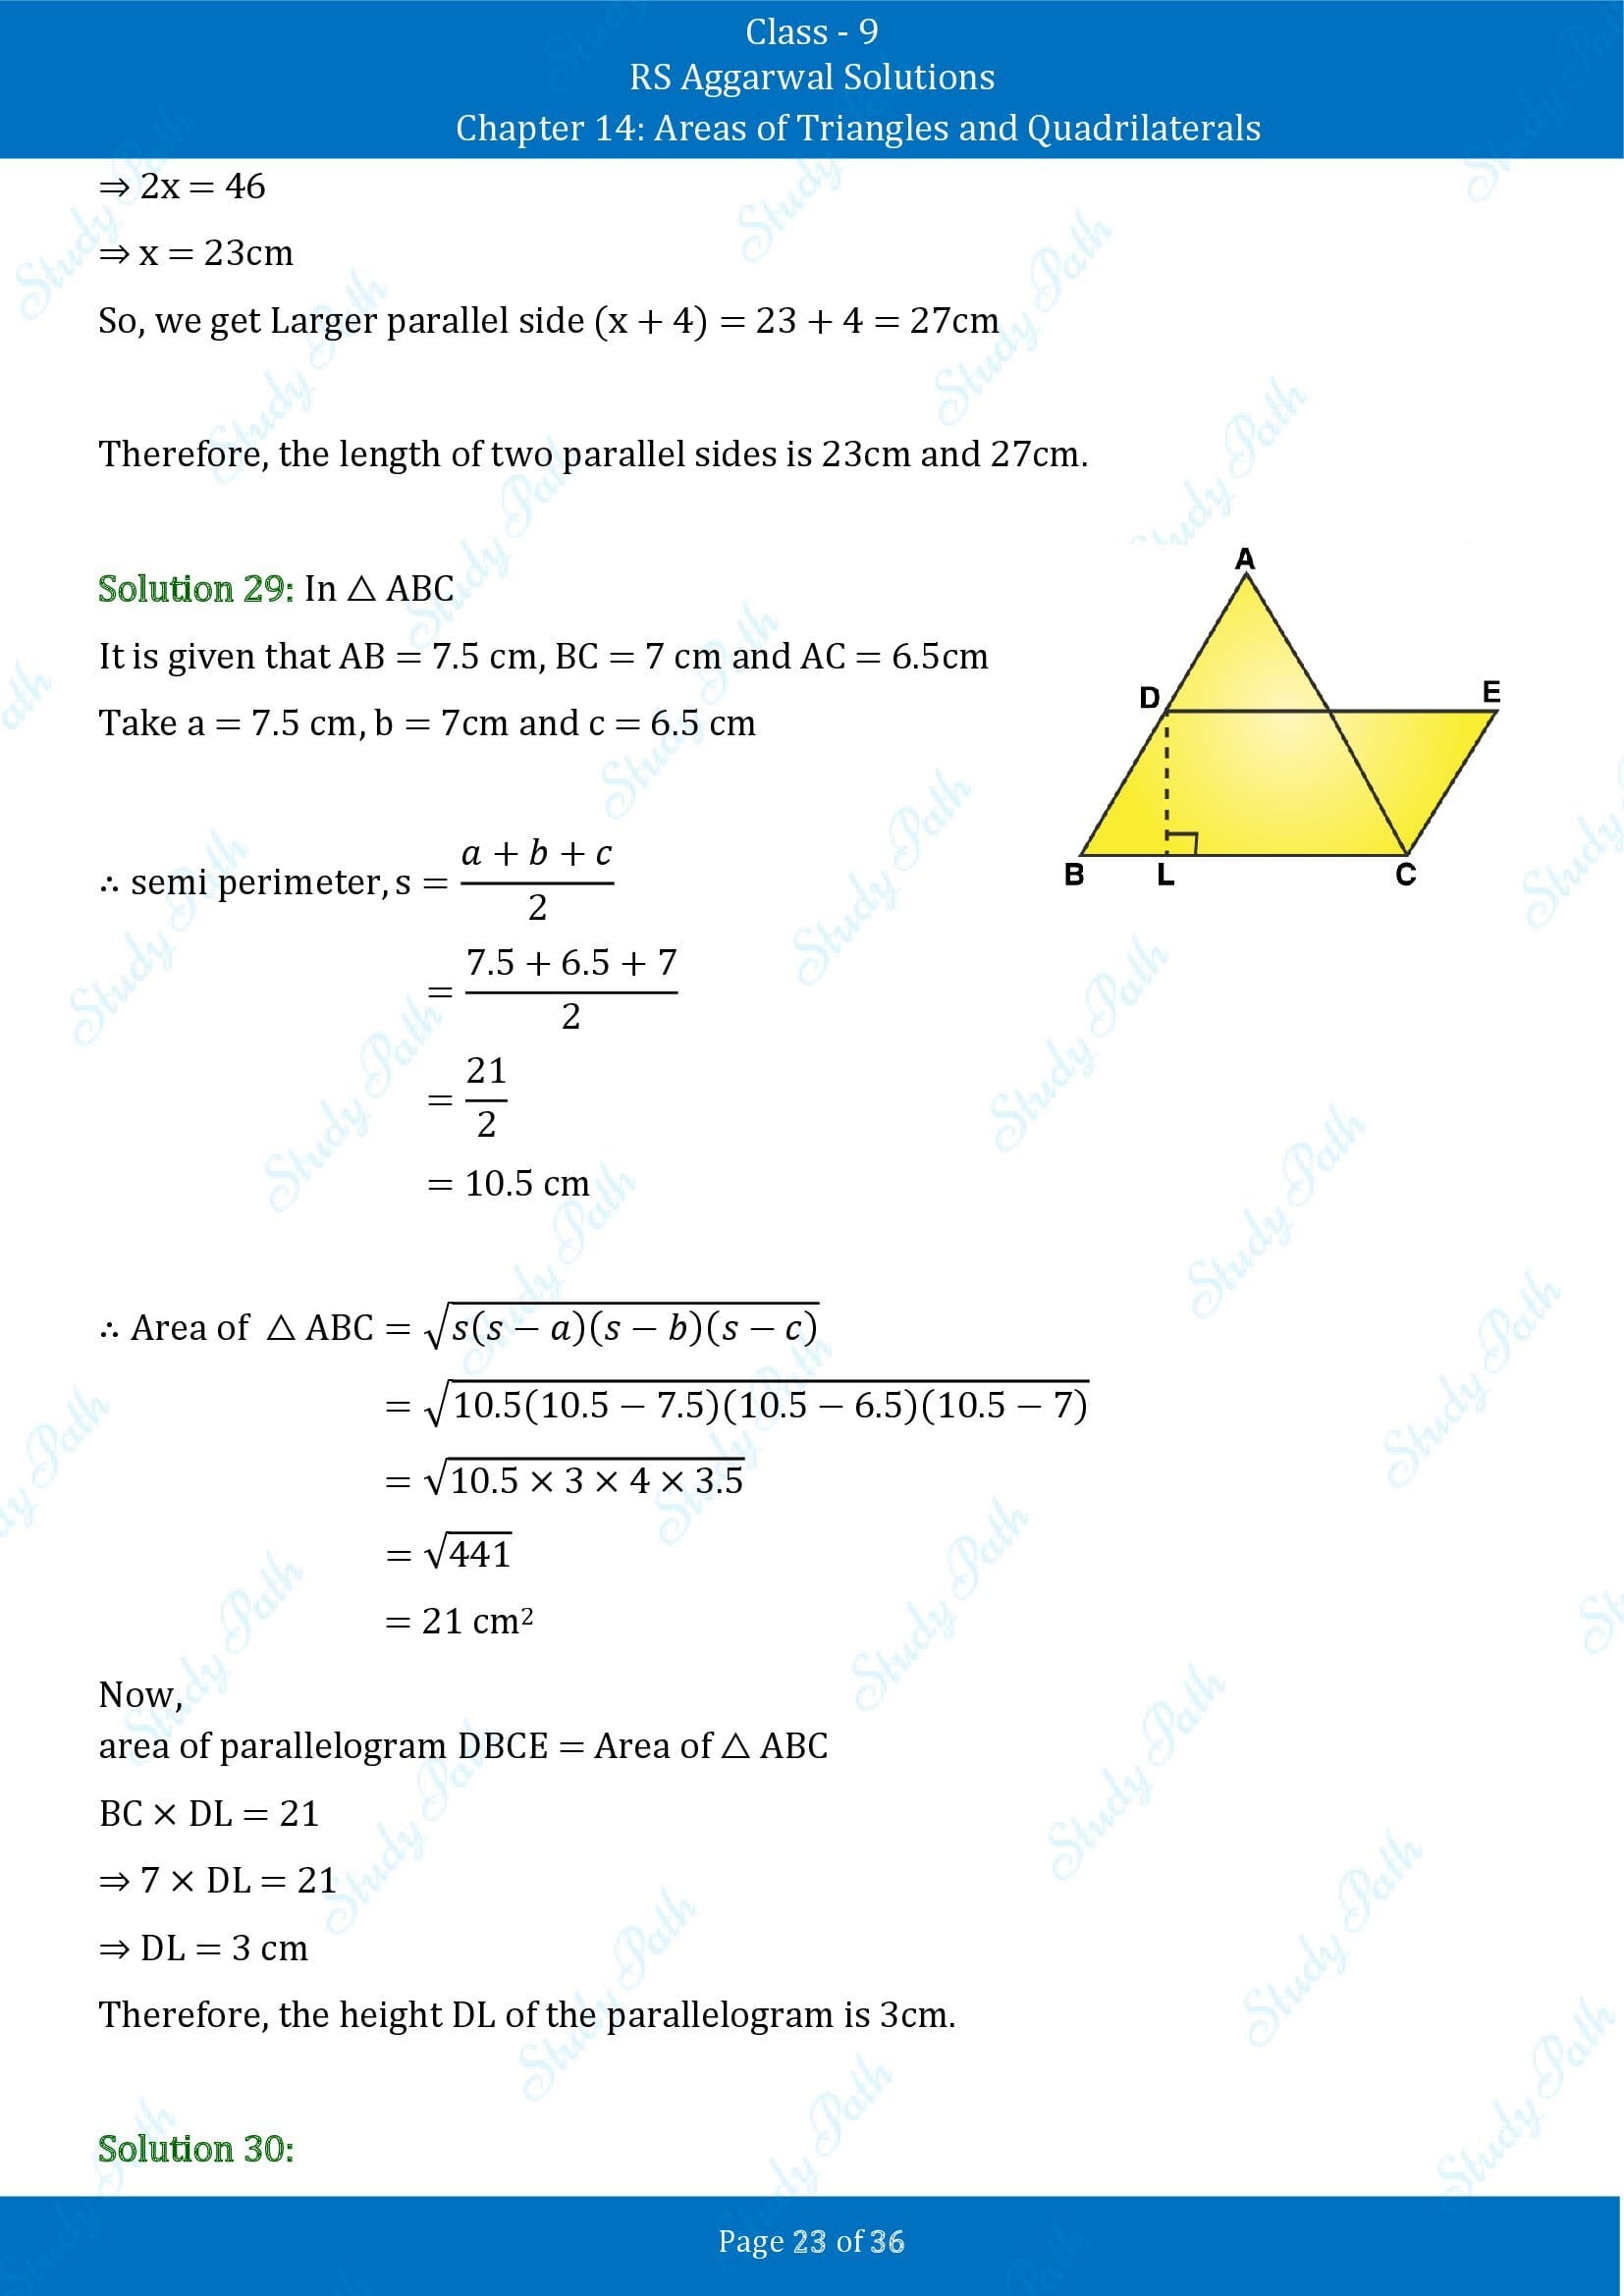 RS Aggarwal Solutions Class 9 Chapter 14 Areas of Triangles and Quadrilaterals Exercise 14 00023